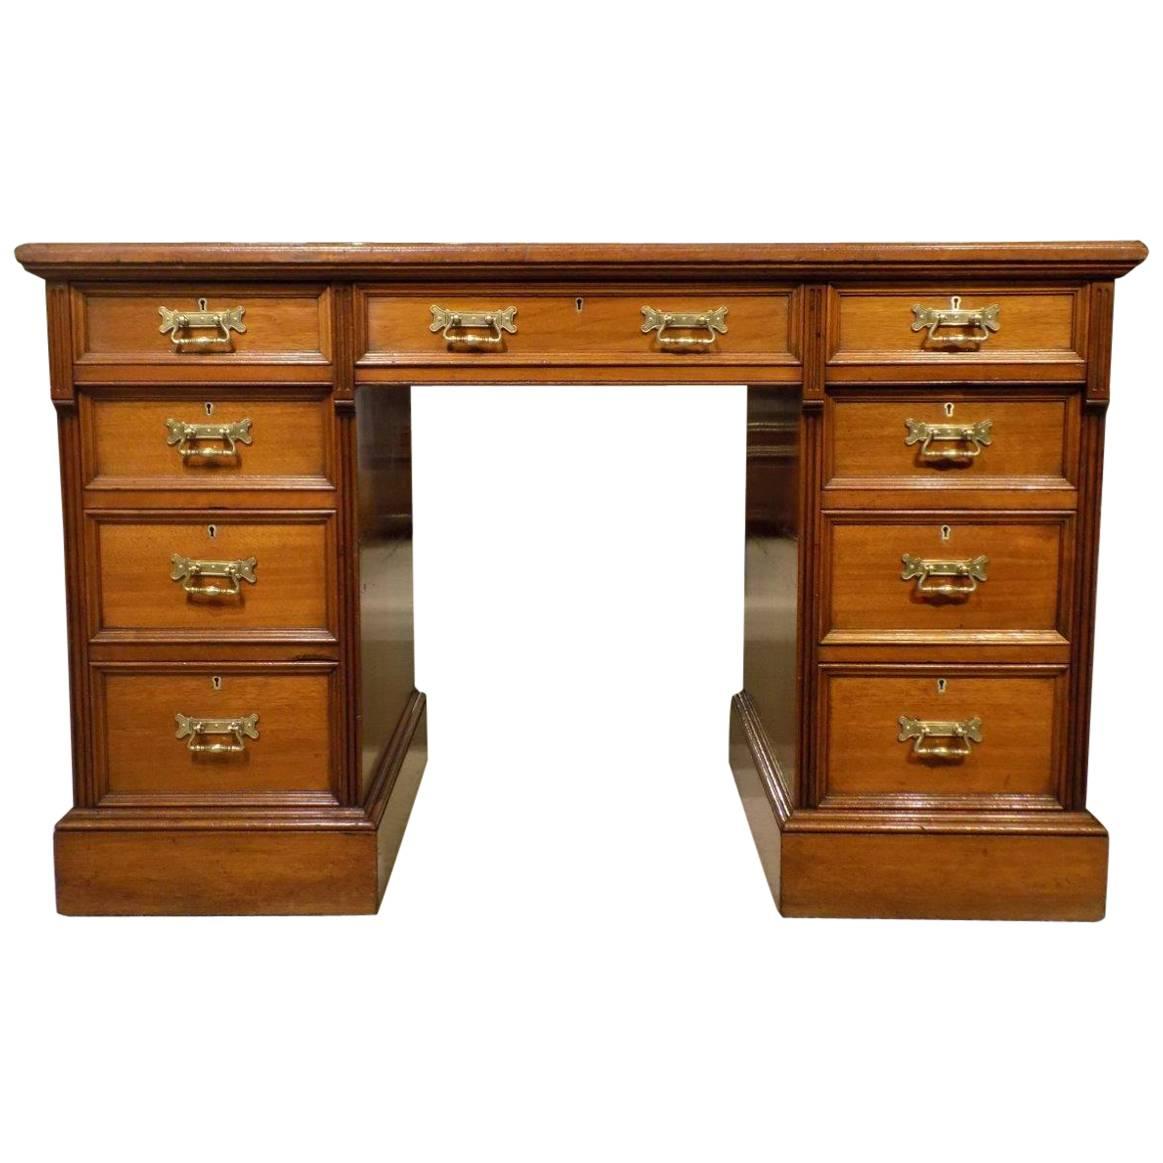 Mahogany Late Victorian Period Antique Pedestal Desk by Hindley & Sons